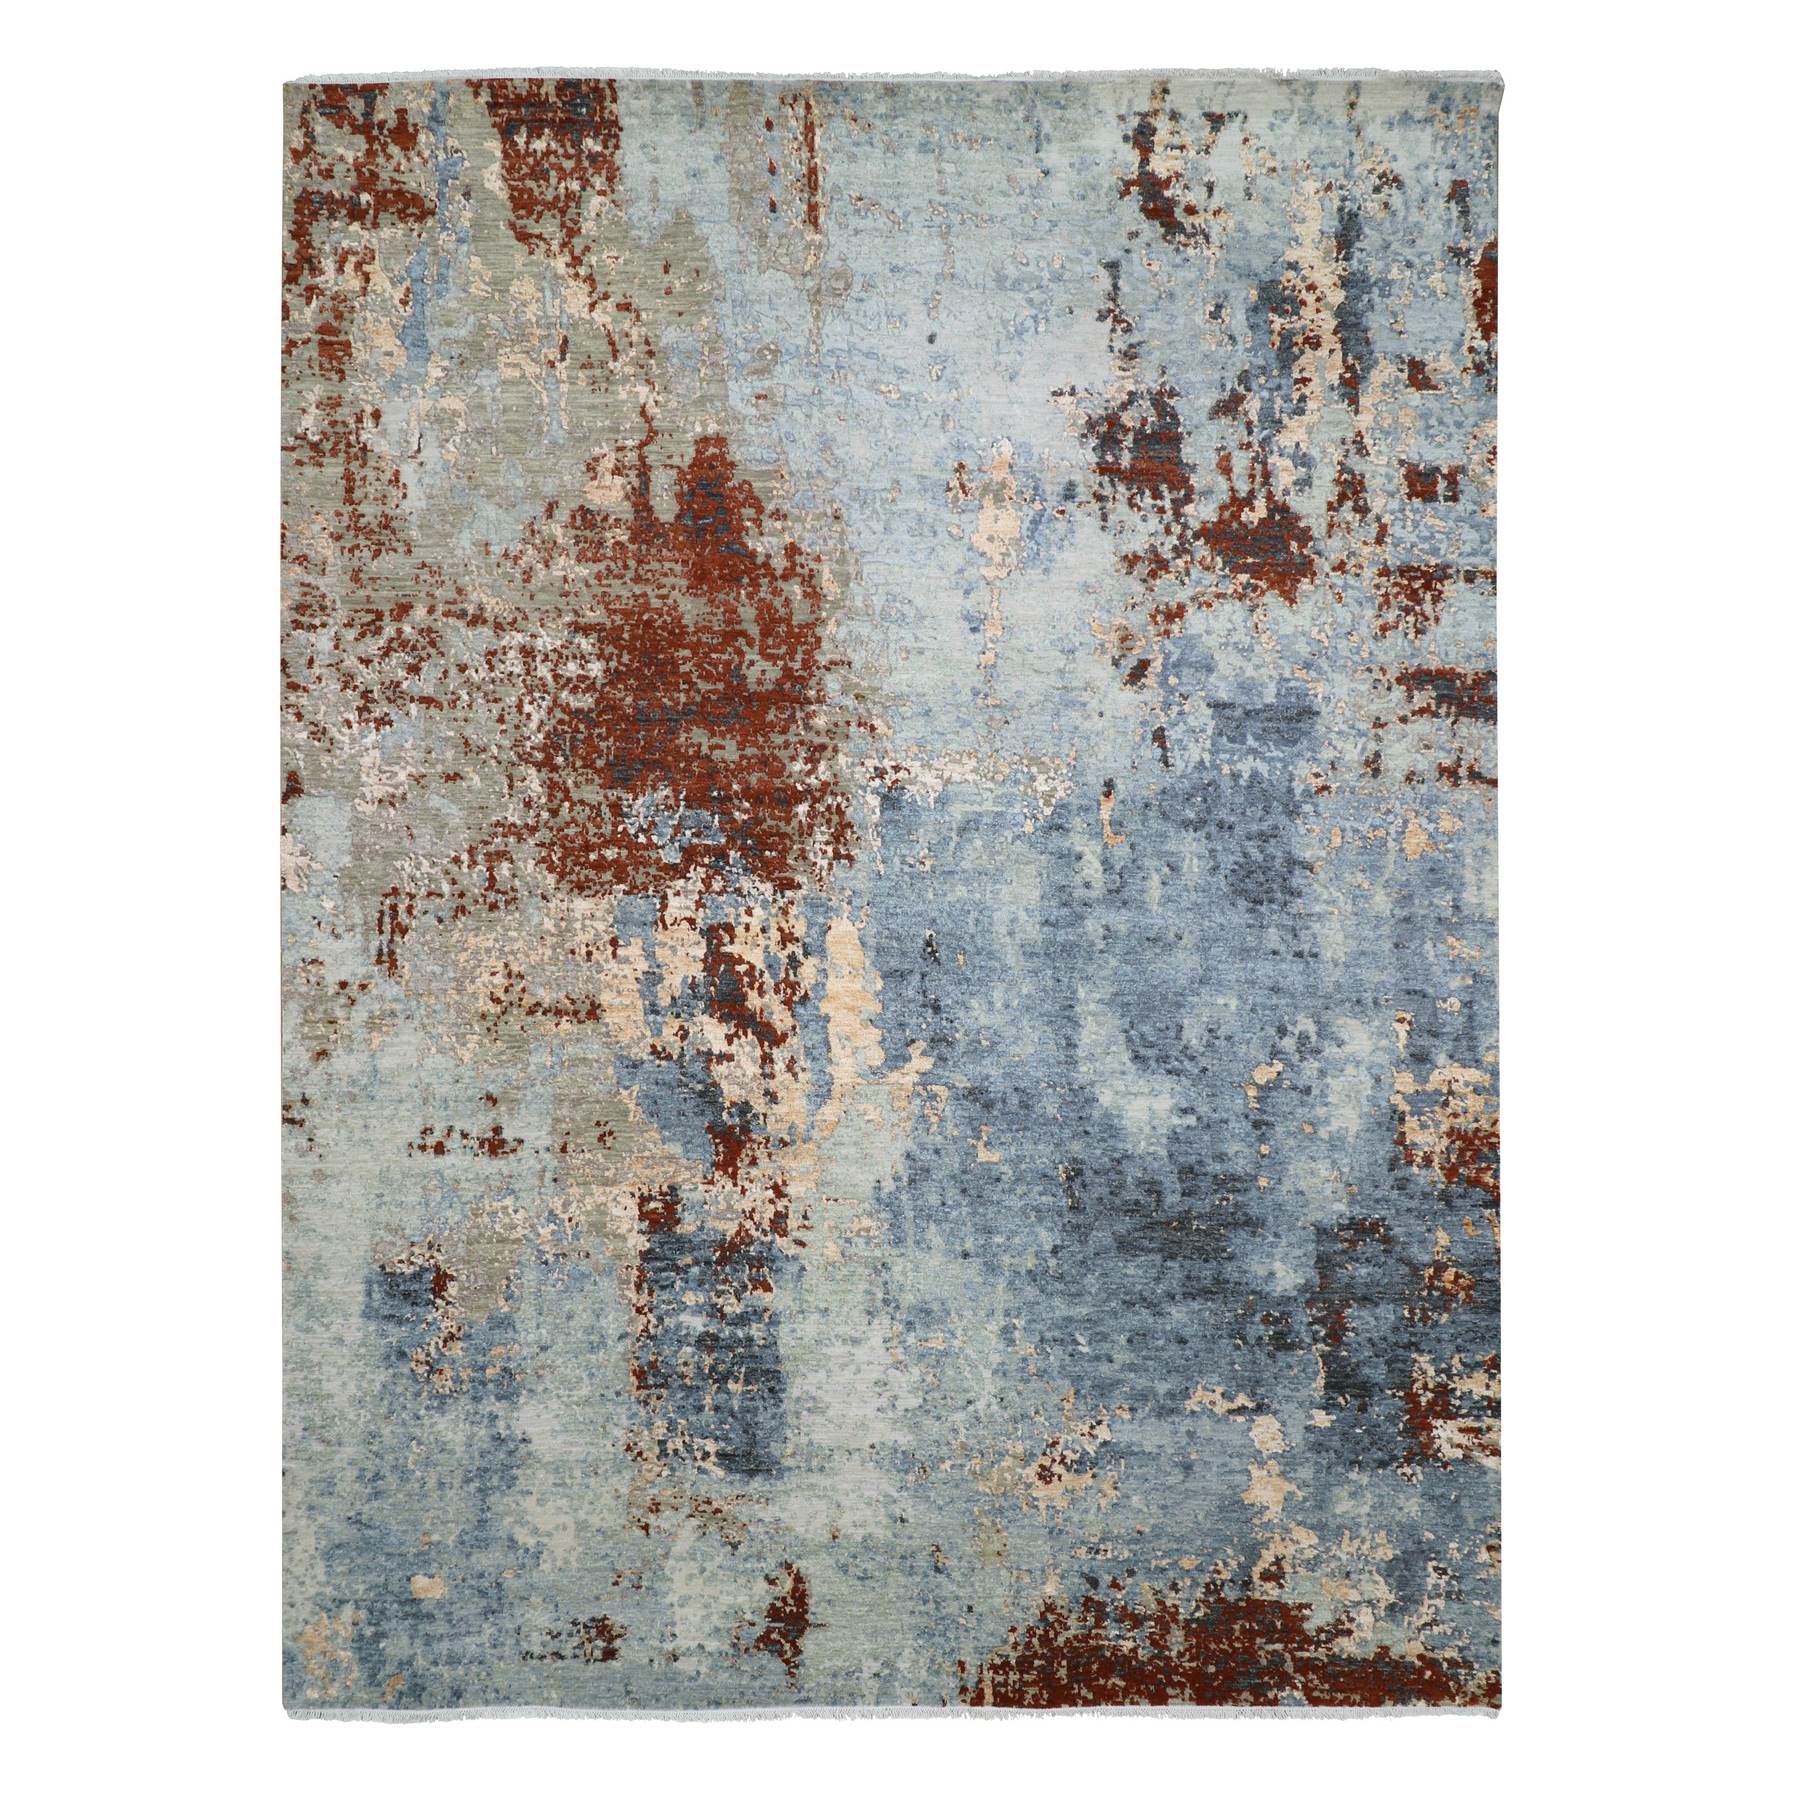 Flint Gray and Brick Red, Hand Knotted Natural Wool, Densely Woven, Abstract Design, Oriental Rug 